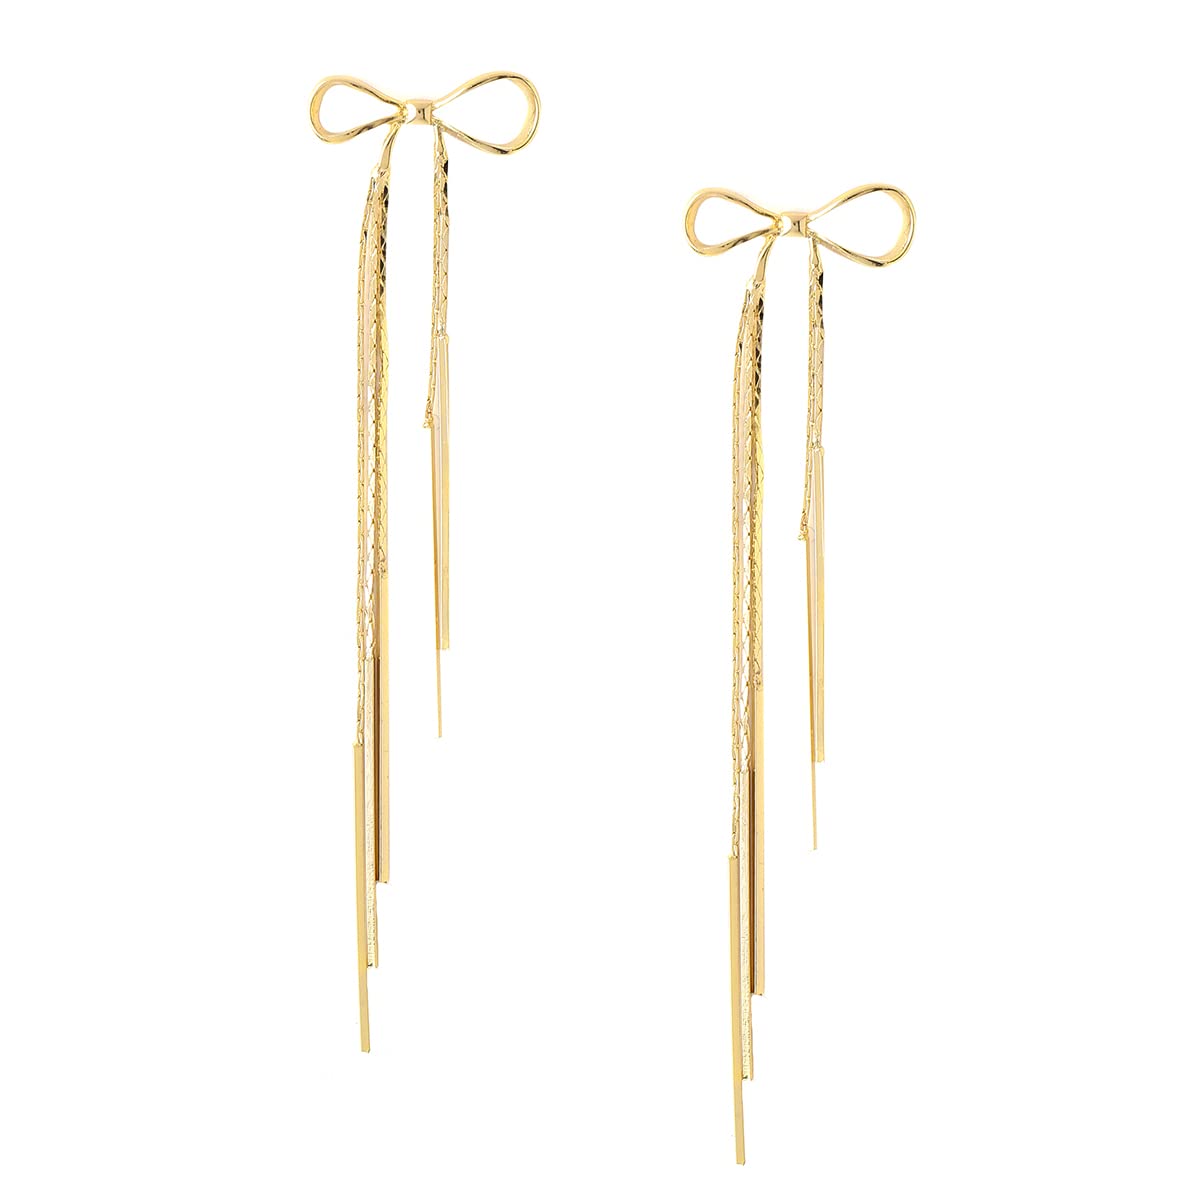 Yellow Chimes Earrings For Women Gold Toned Bow Knot Shaped Stud With Linear Chains Hanging Dangler Earrings For Women and Girls